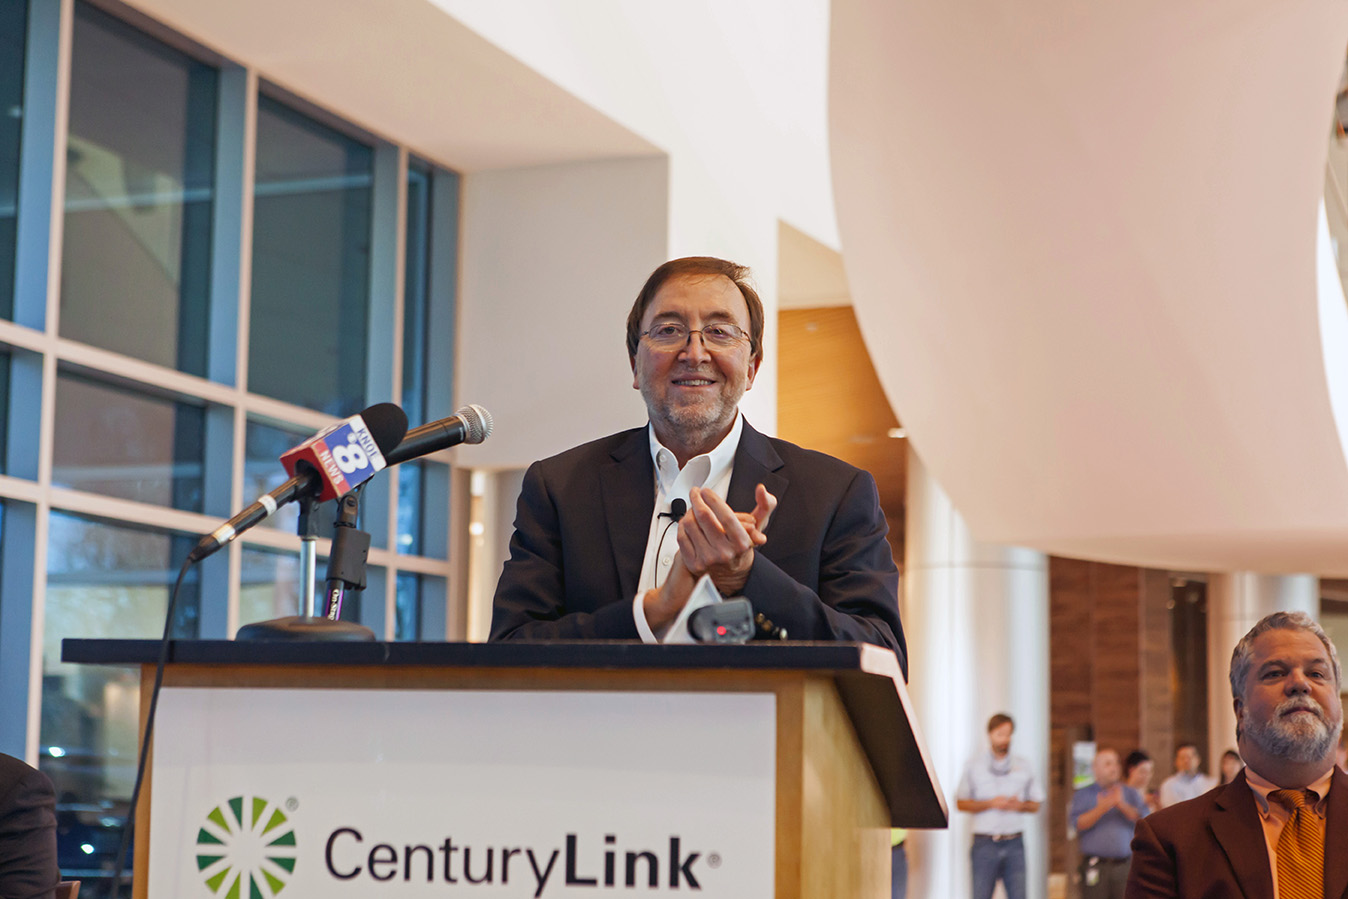 President & CEO Glen Post wanted to keep CenturyLink in Monroe. As a graduate of nearby Louisiana Tech University, Post recognized the value of maintaining CenturyLink’s decades-long relationship with the state.